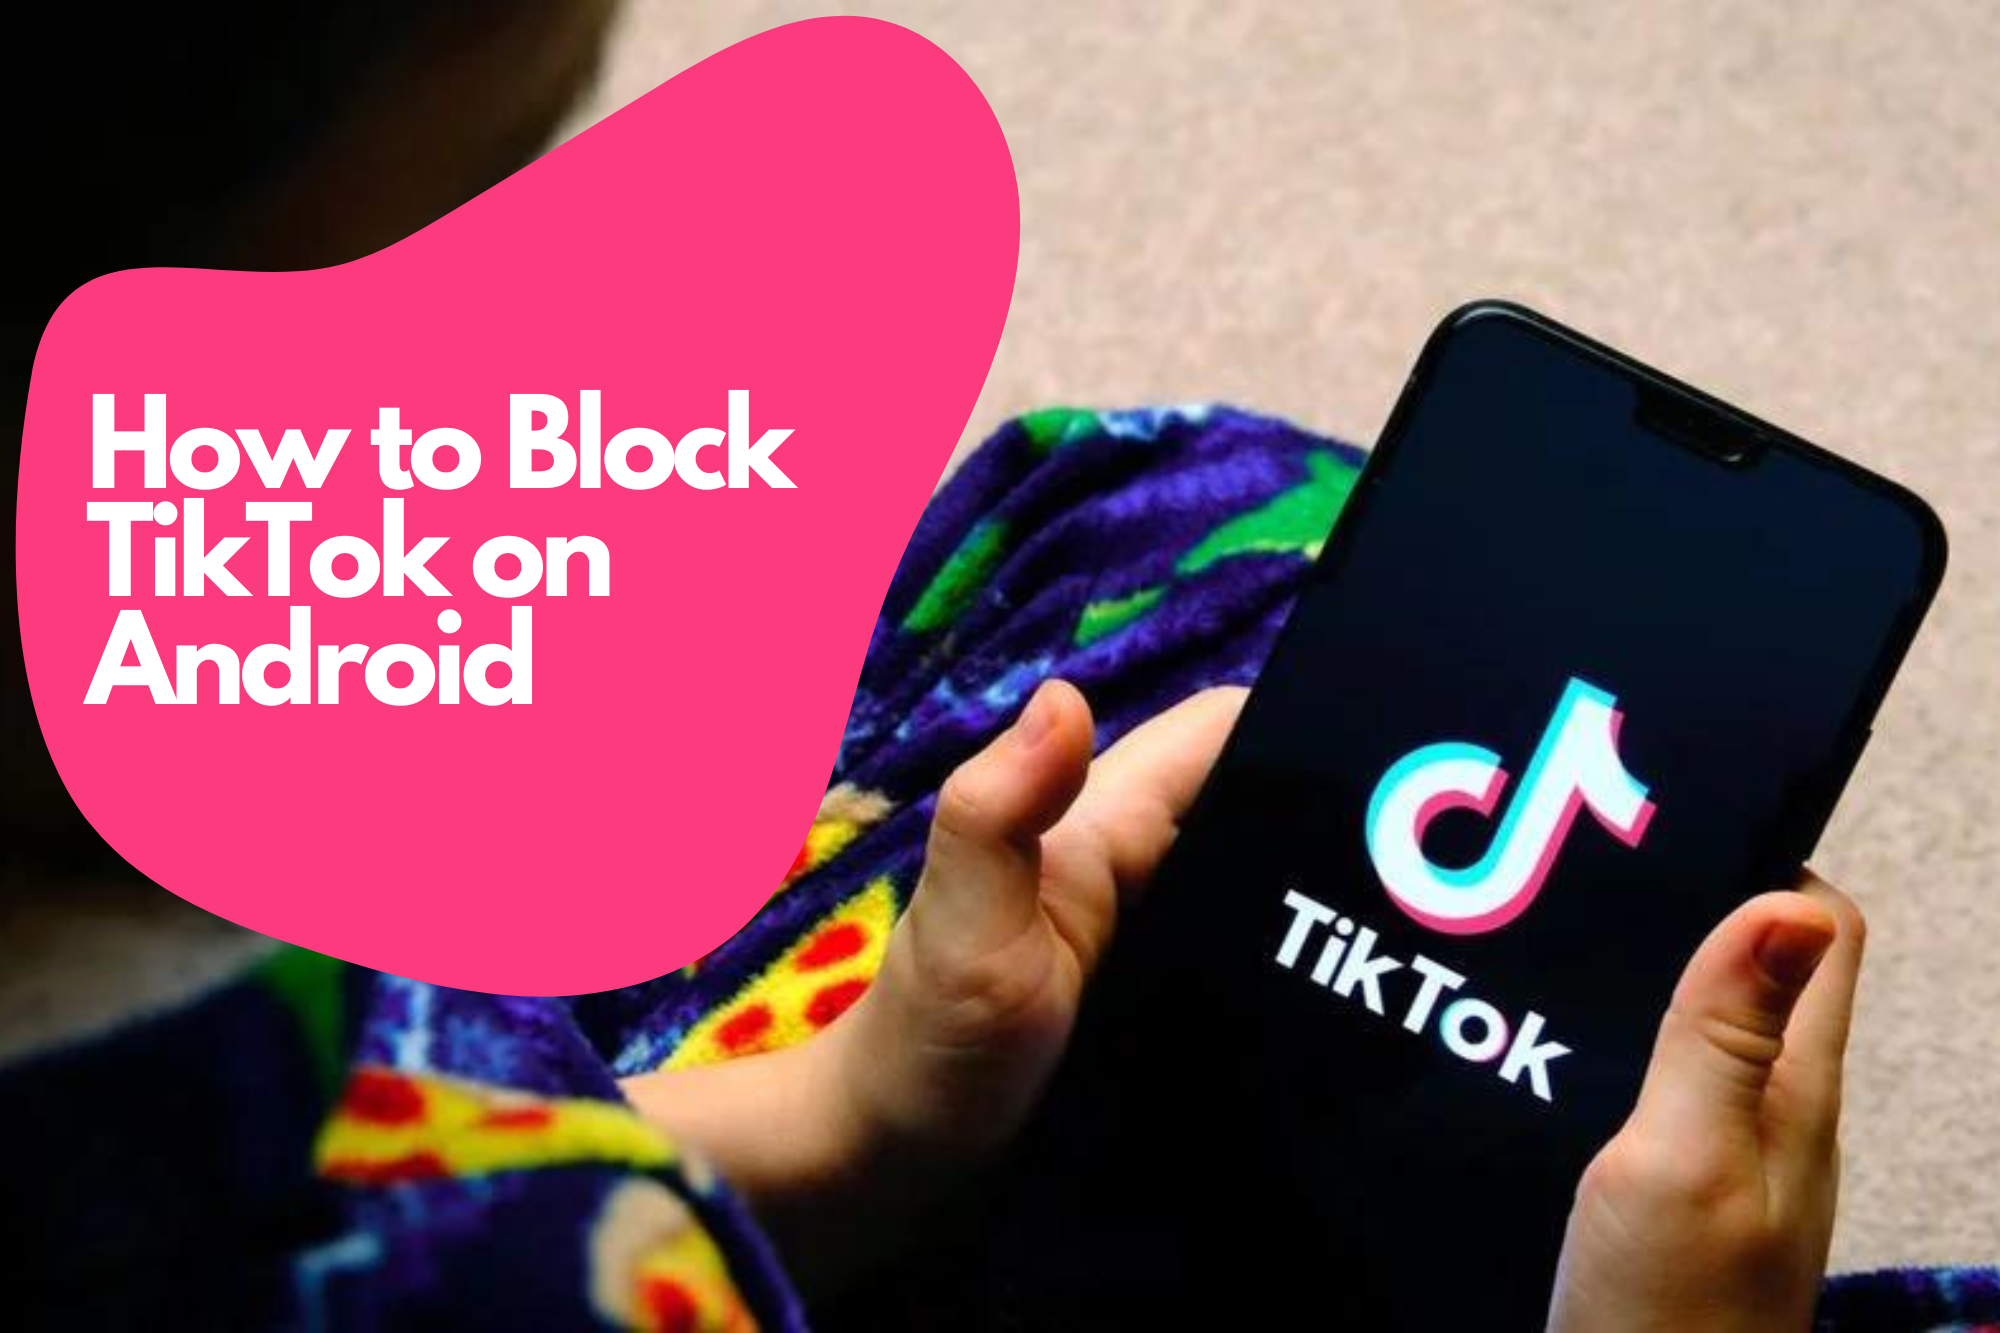 How to Block TikTok on Android